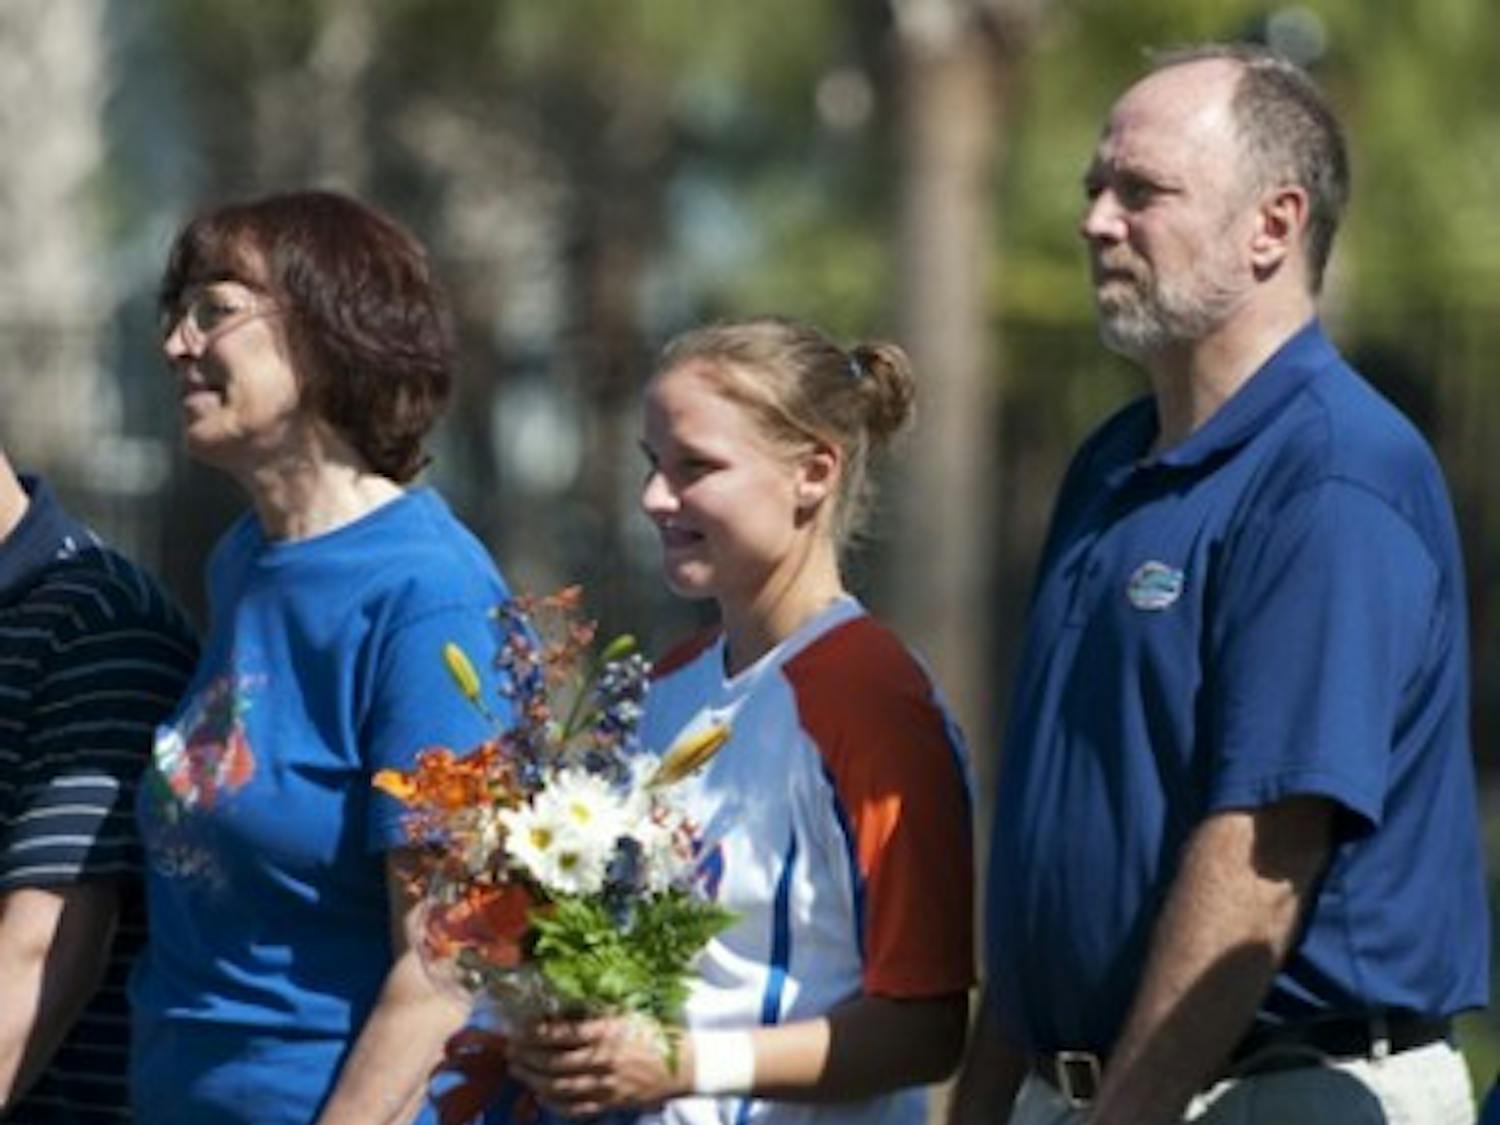 Florida midfielder Sarah Chapman (center) is presented a framed jersey during Florida’s Senior Day on Oct. 23 as parents Rick (right) and Lynn (left) look on.